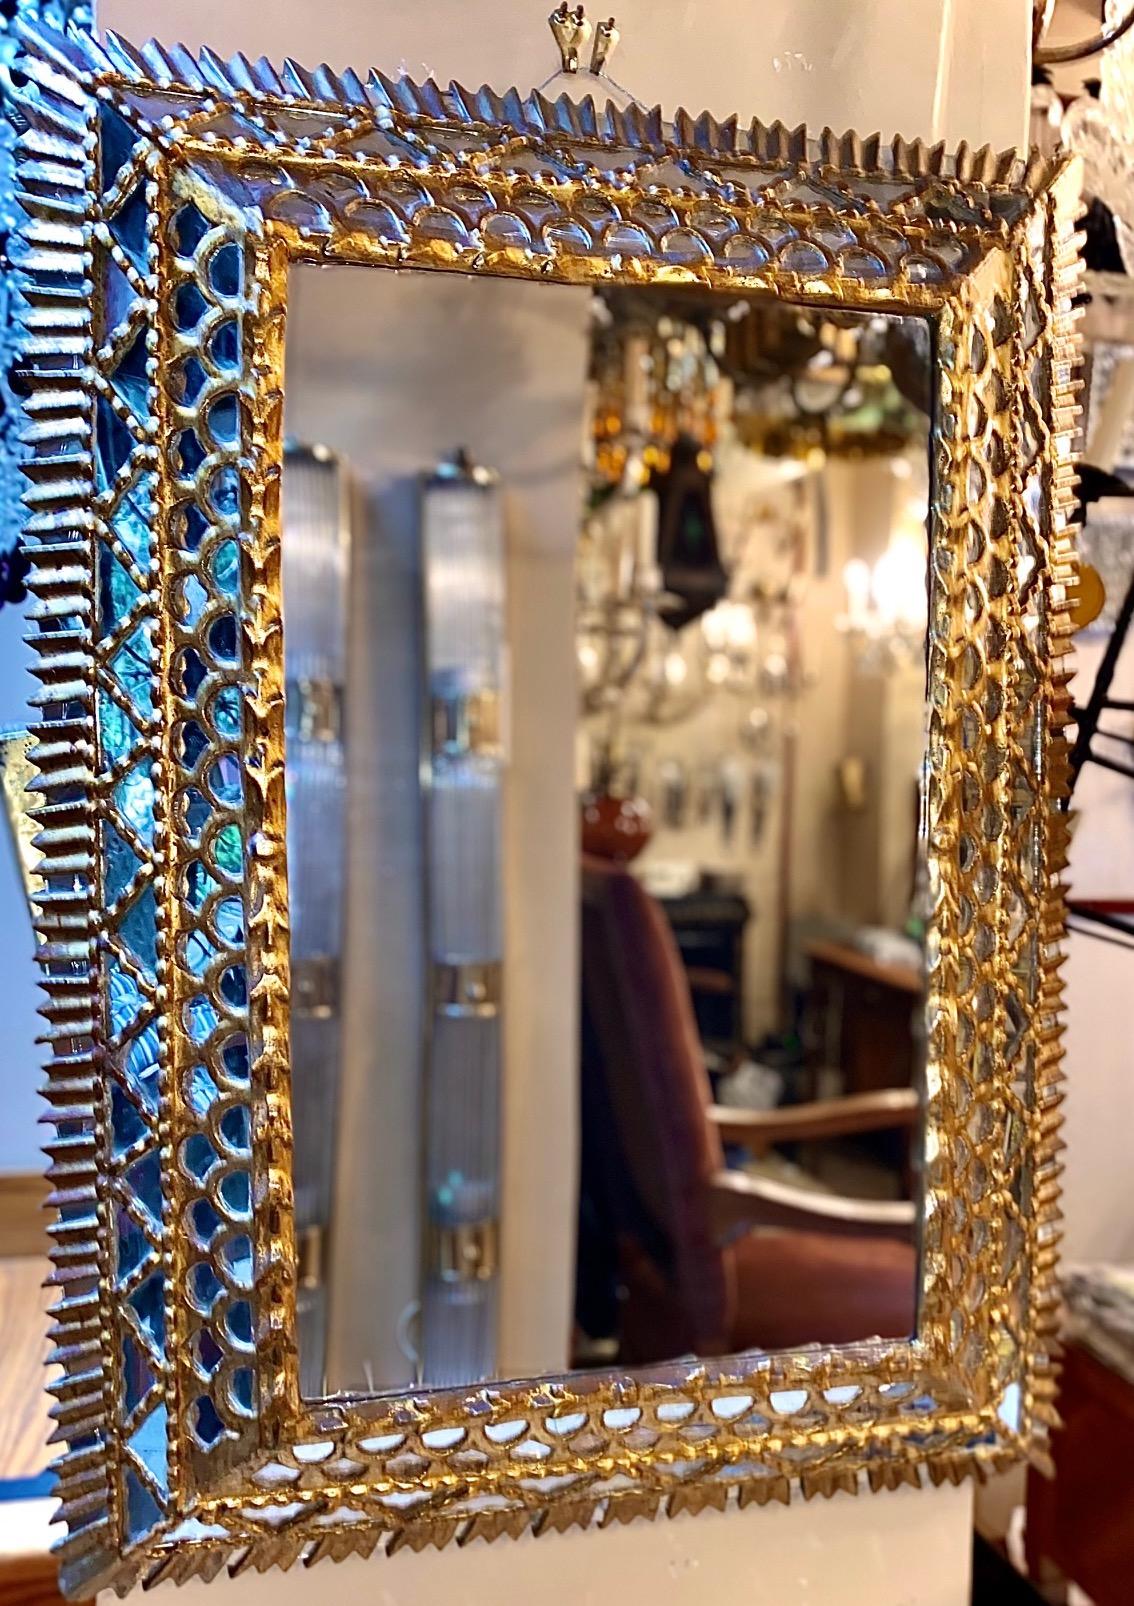 A circa 1920s Spanish giltwood rectangular mirror with mirror insets in frame.

Measurements:
Height 25